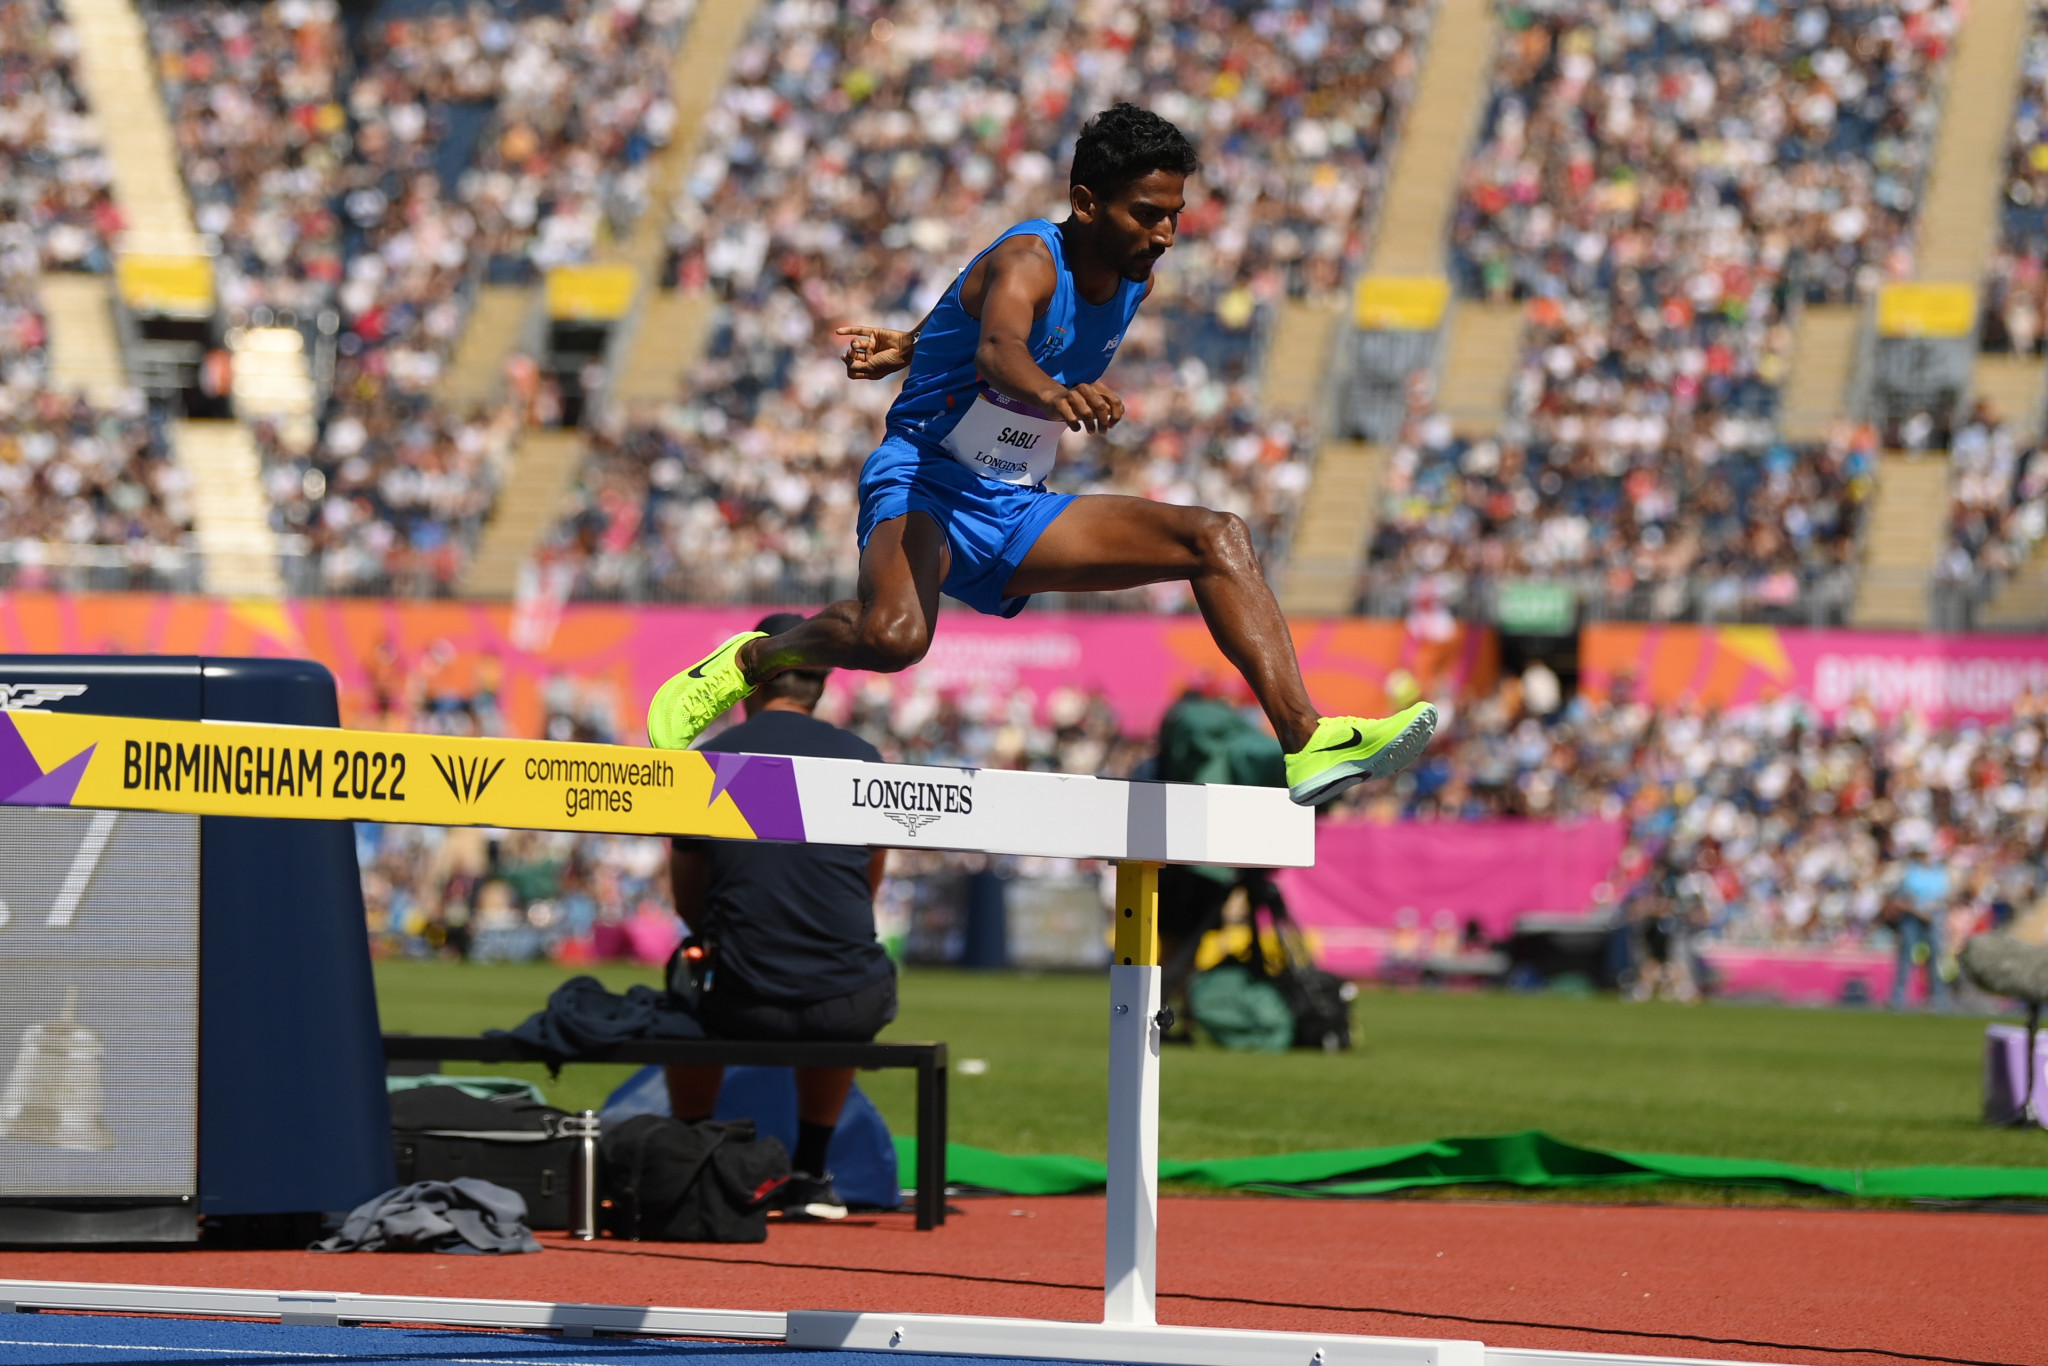 Steeplechase runner Avinash Sable will be looking to secure his first world medal after sealing silver at last year's Commonwealth Games in Birmingham ©Getty Images